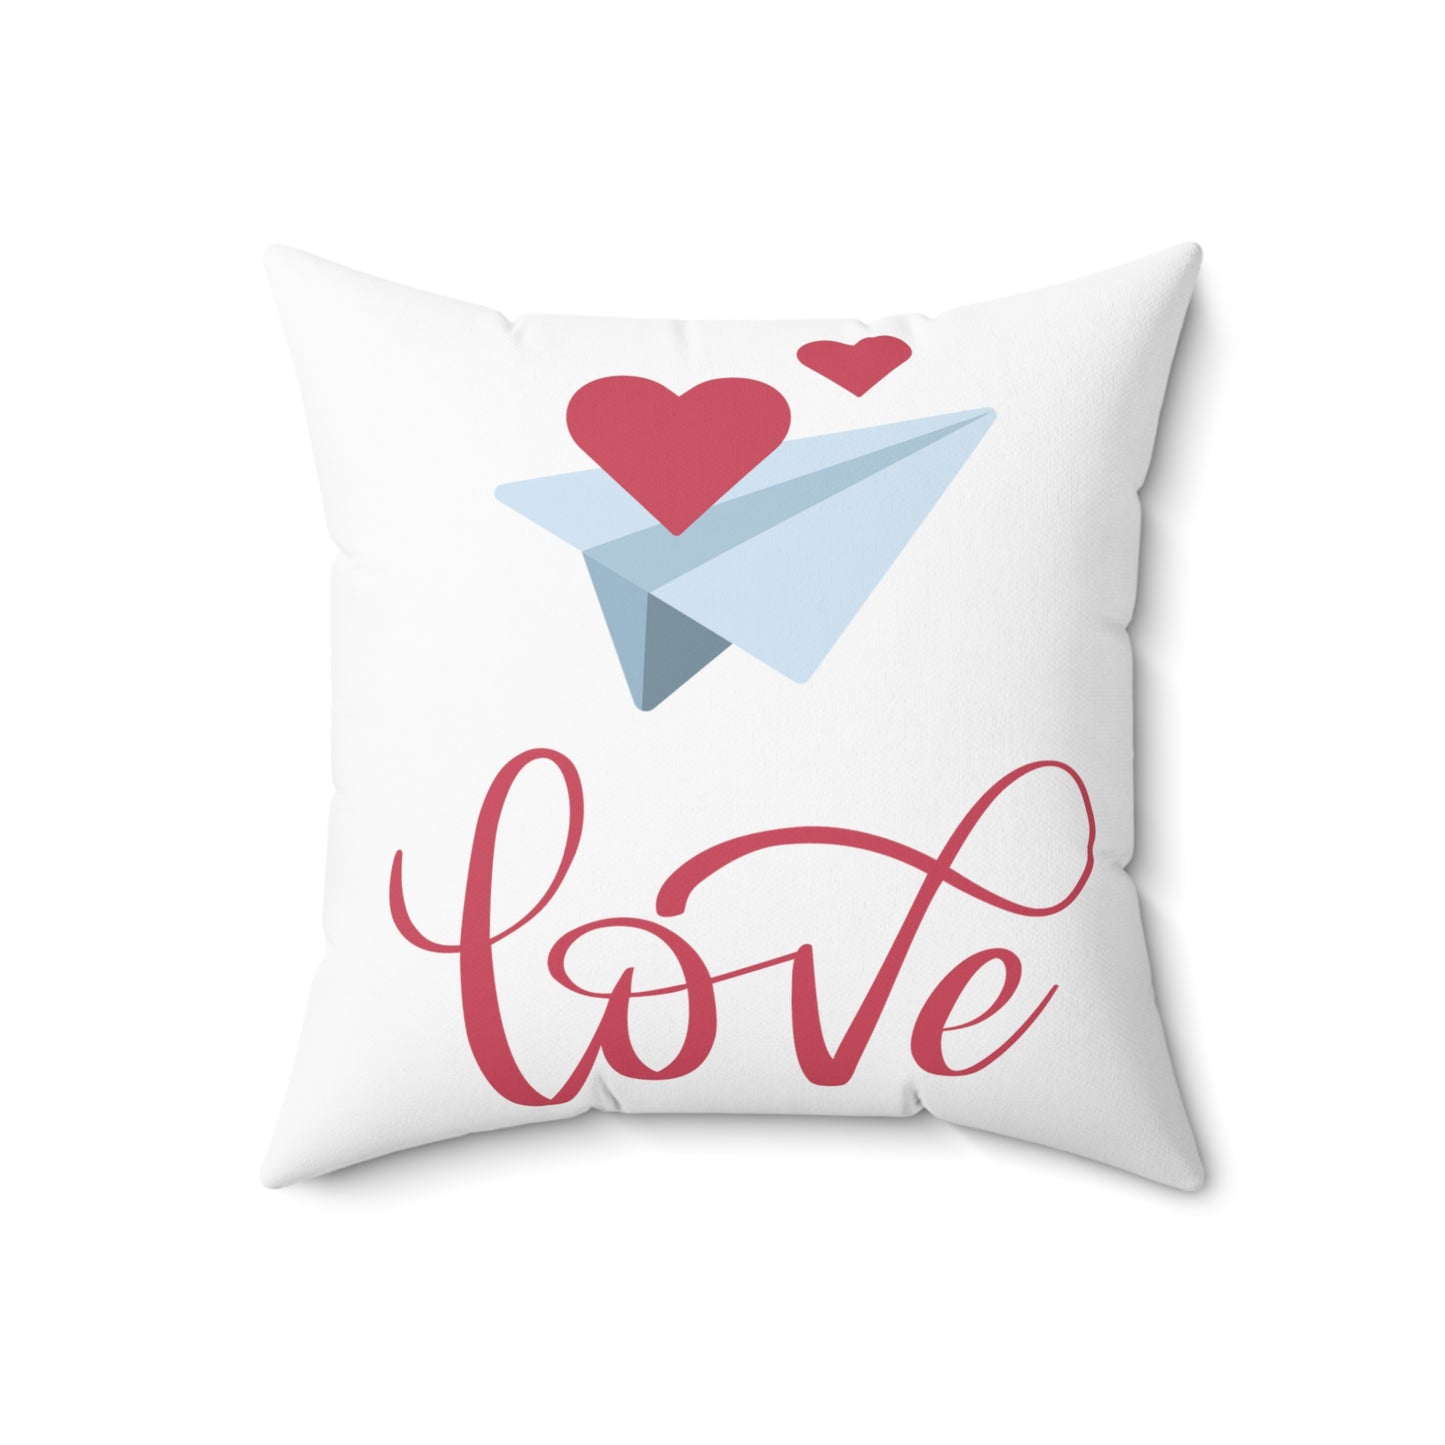 Love with Flying Hearts Prtinted Sqaure Pillow Case for Valentine